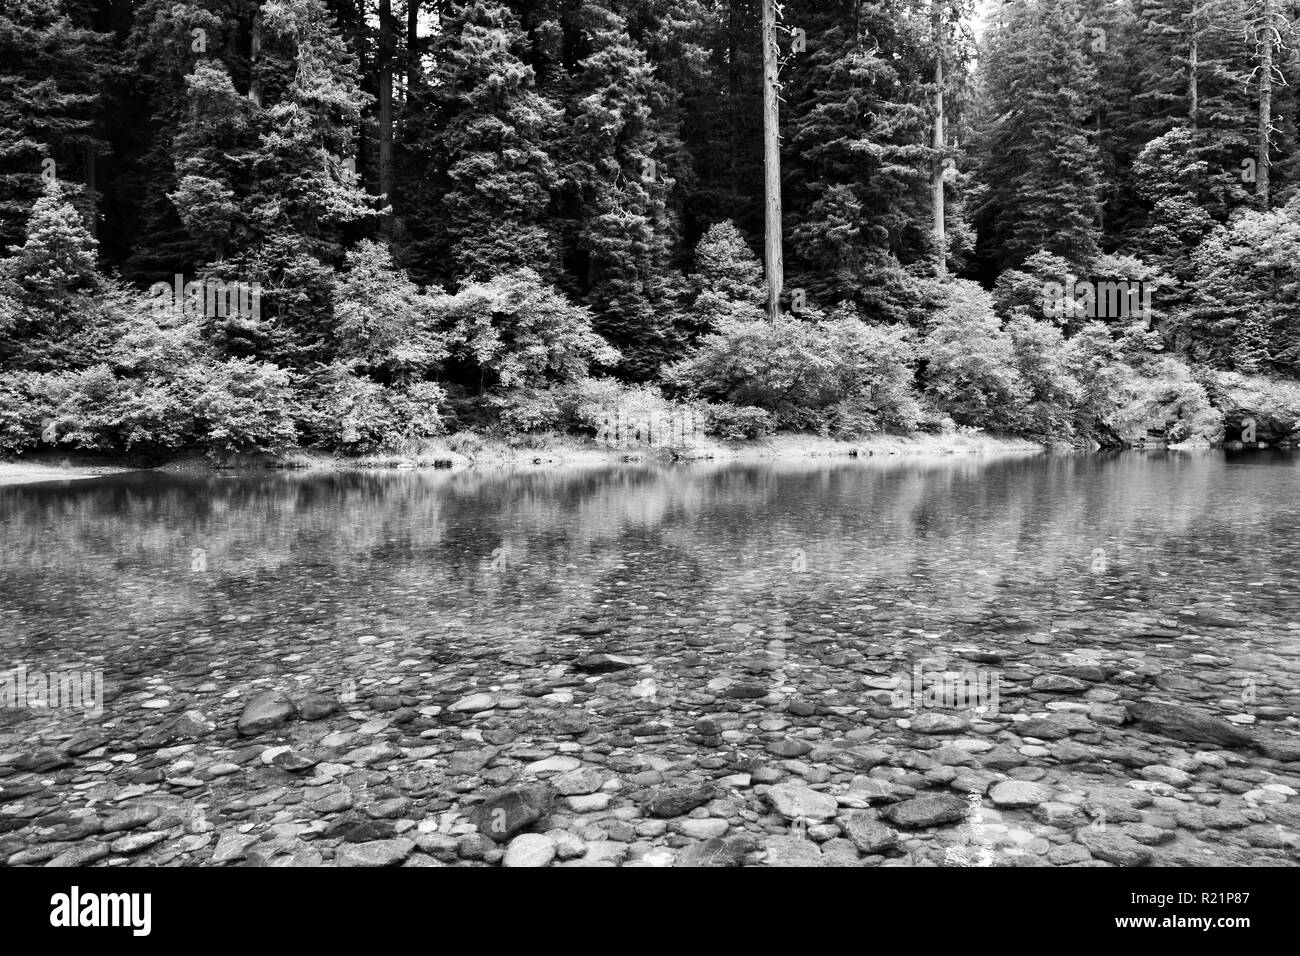 The Smith River at Jedediah Smith Redwoods State Park in black and white Stock Photo